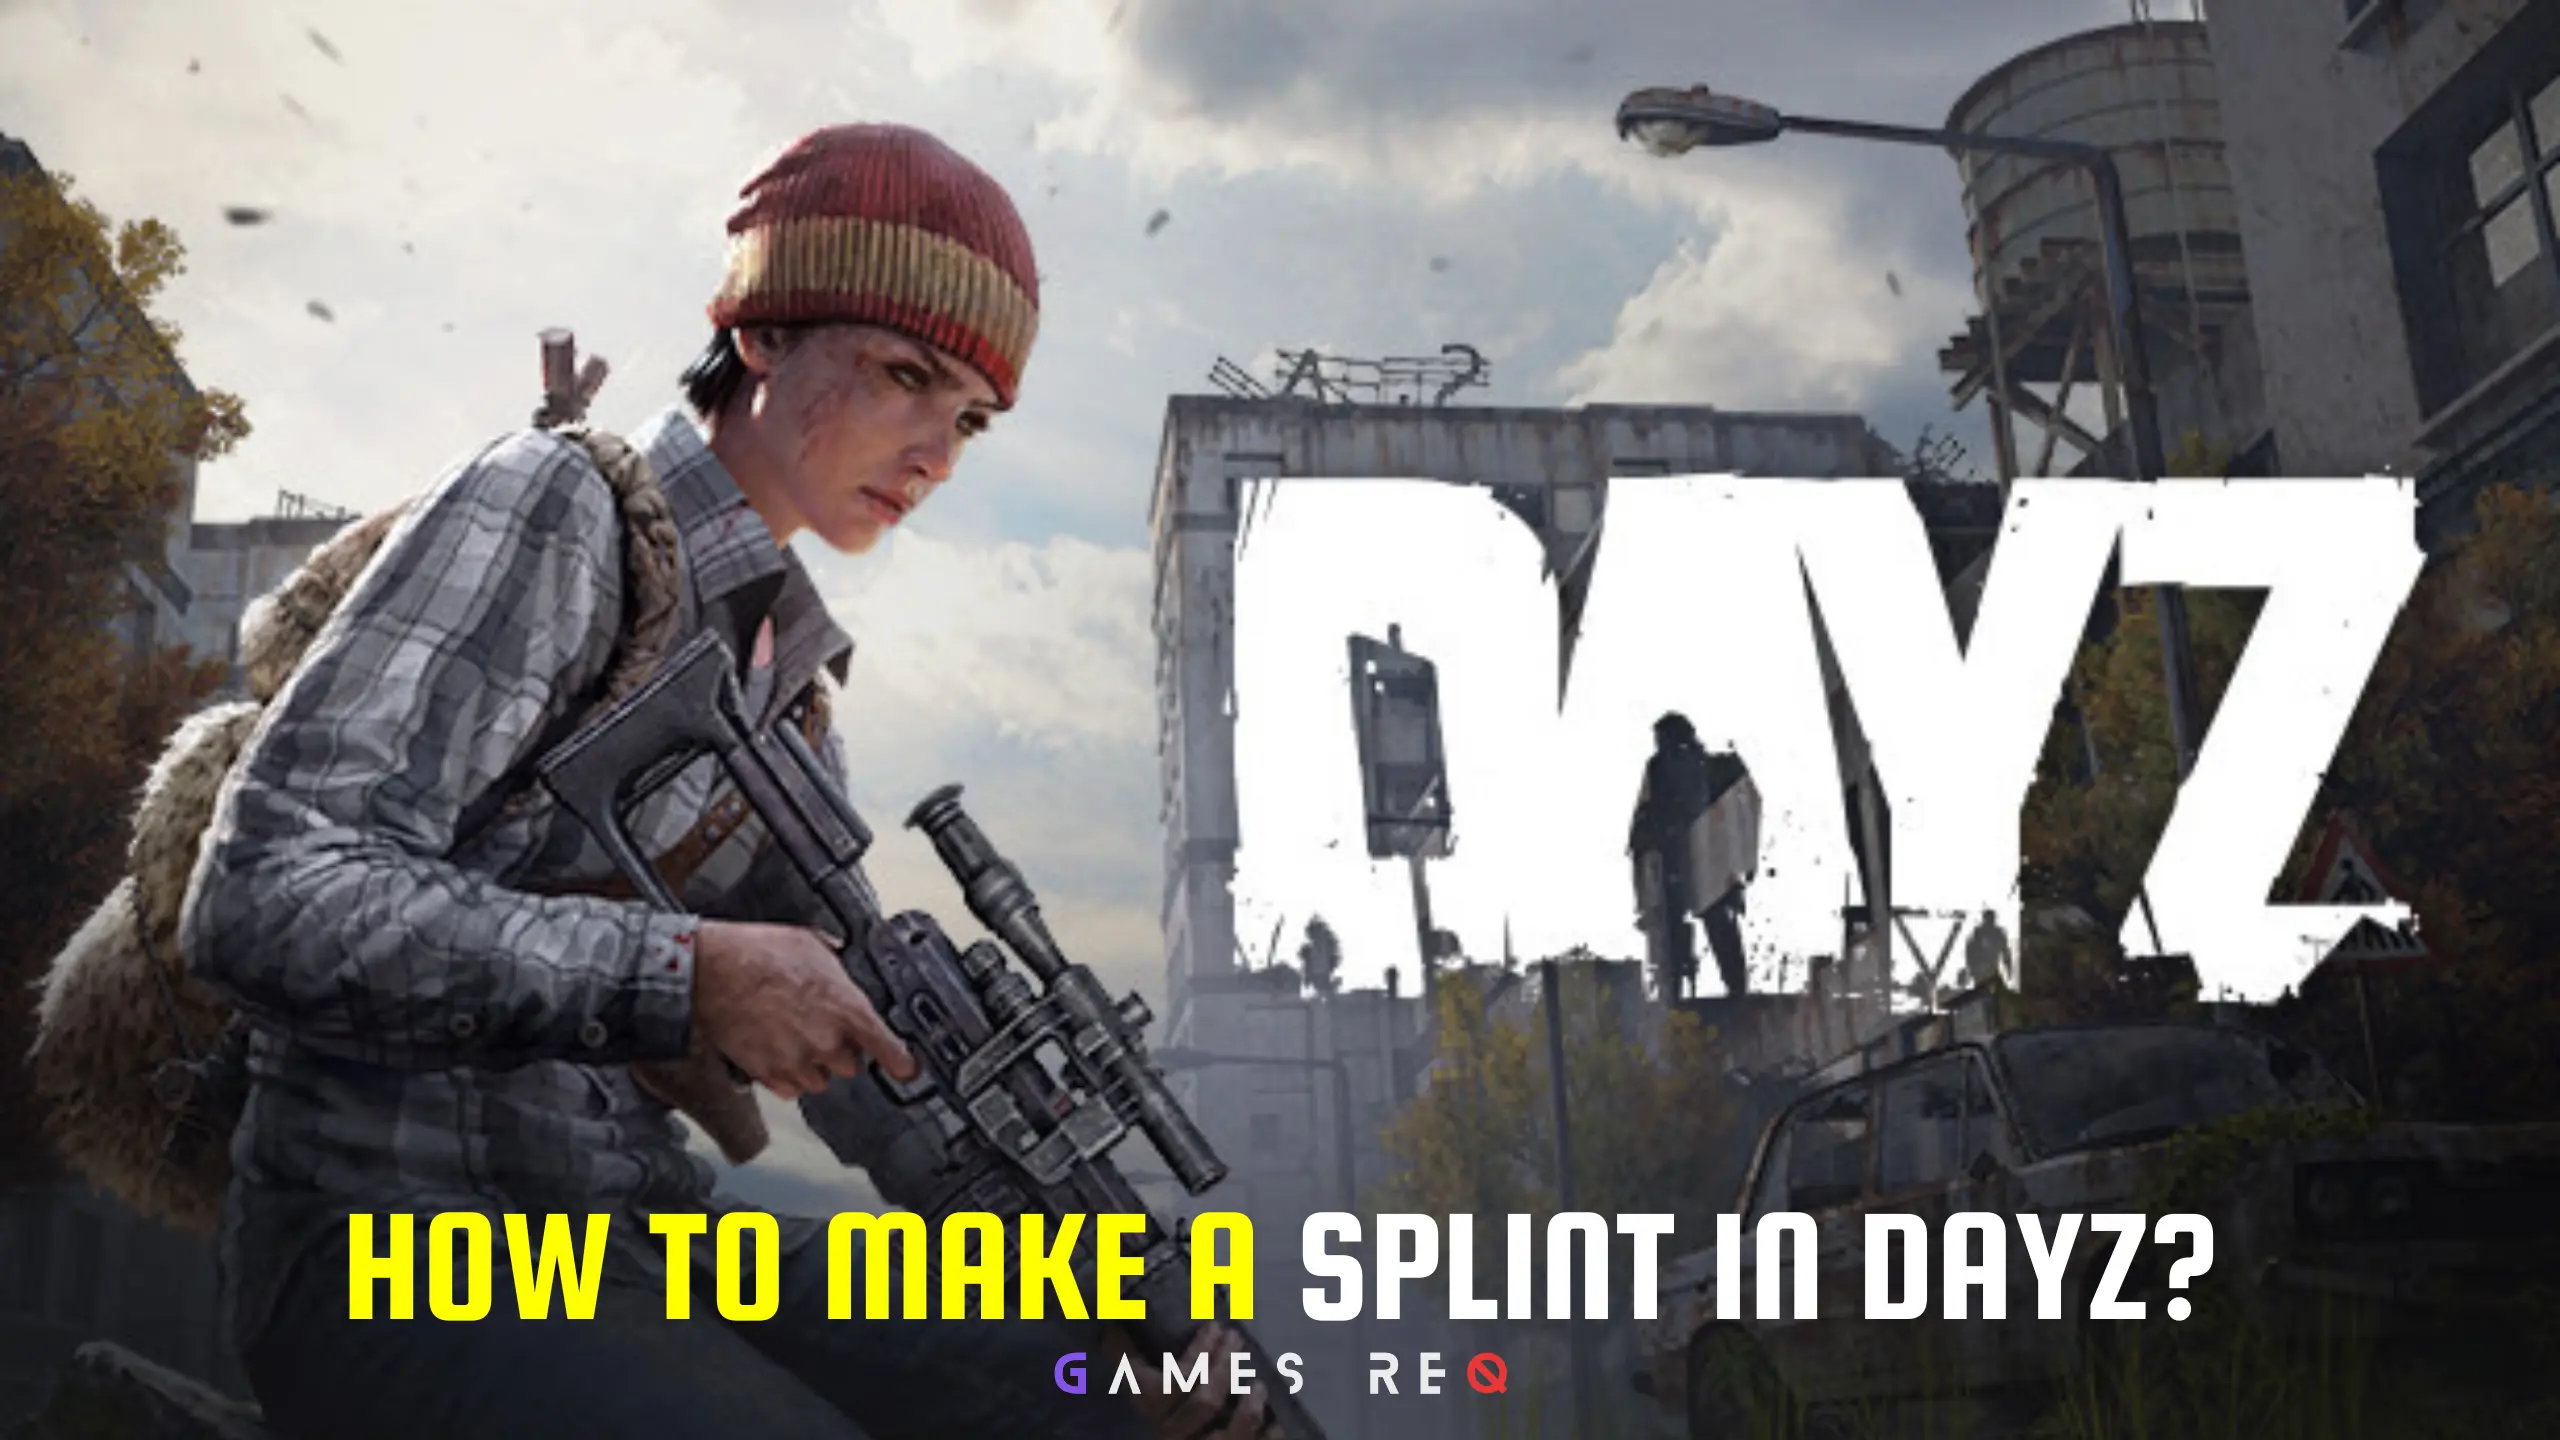 How to Make a Splint in DayZ